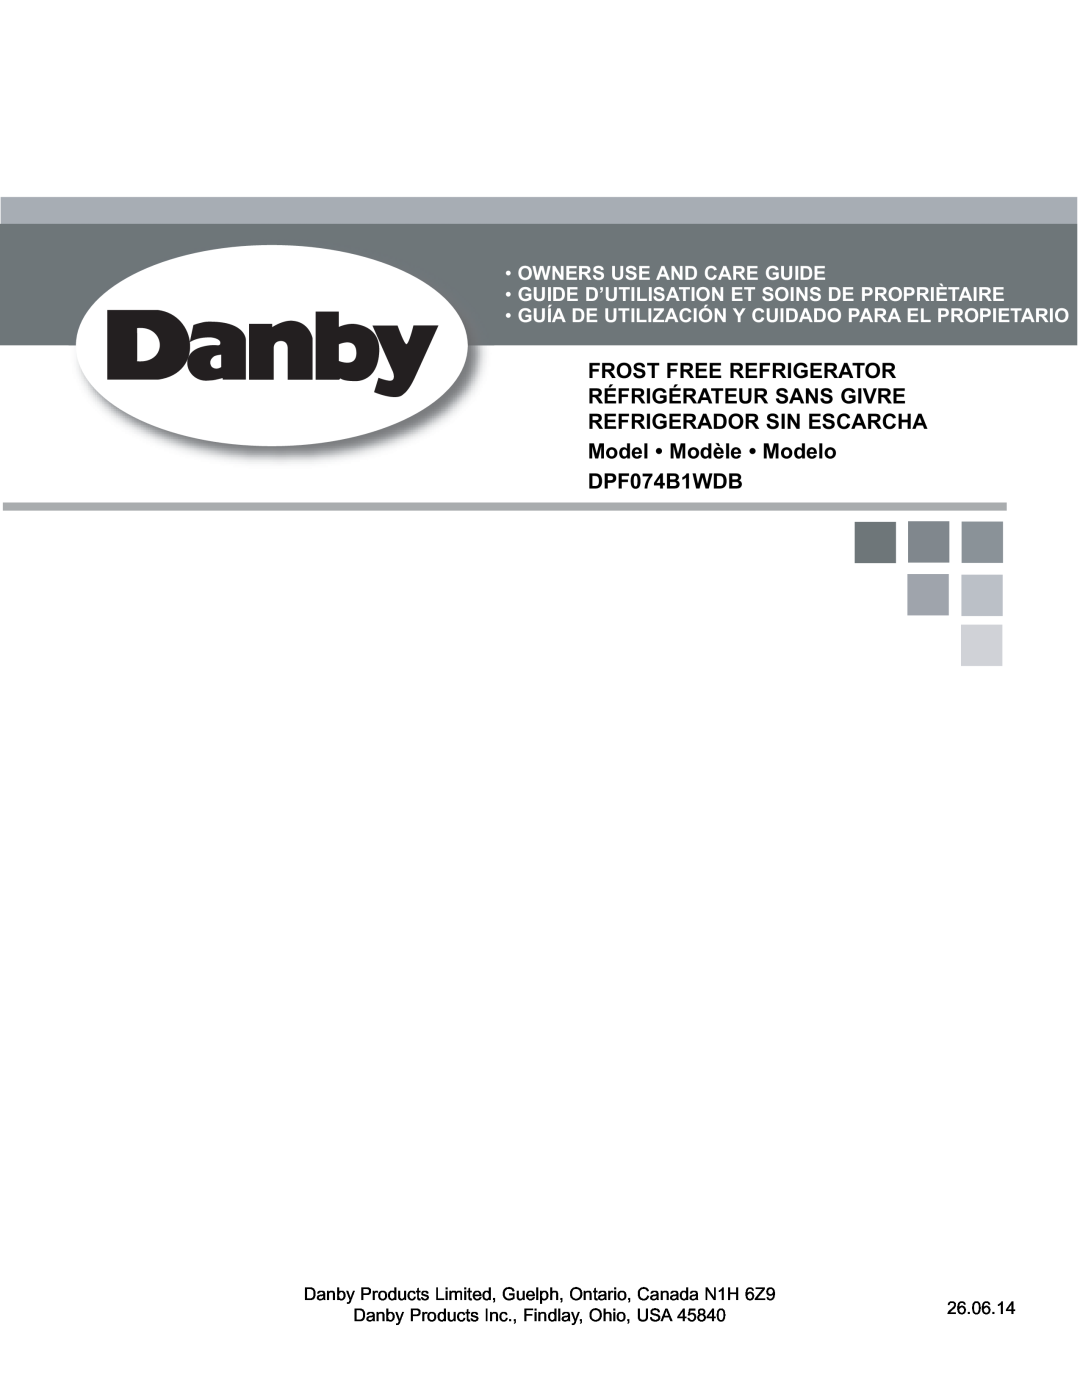 Danby DPF074B1WDB manual Frost Free Refrigerator Réfrigérateur Sans Givre, Owners Use And Care Guide 